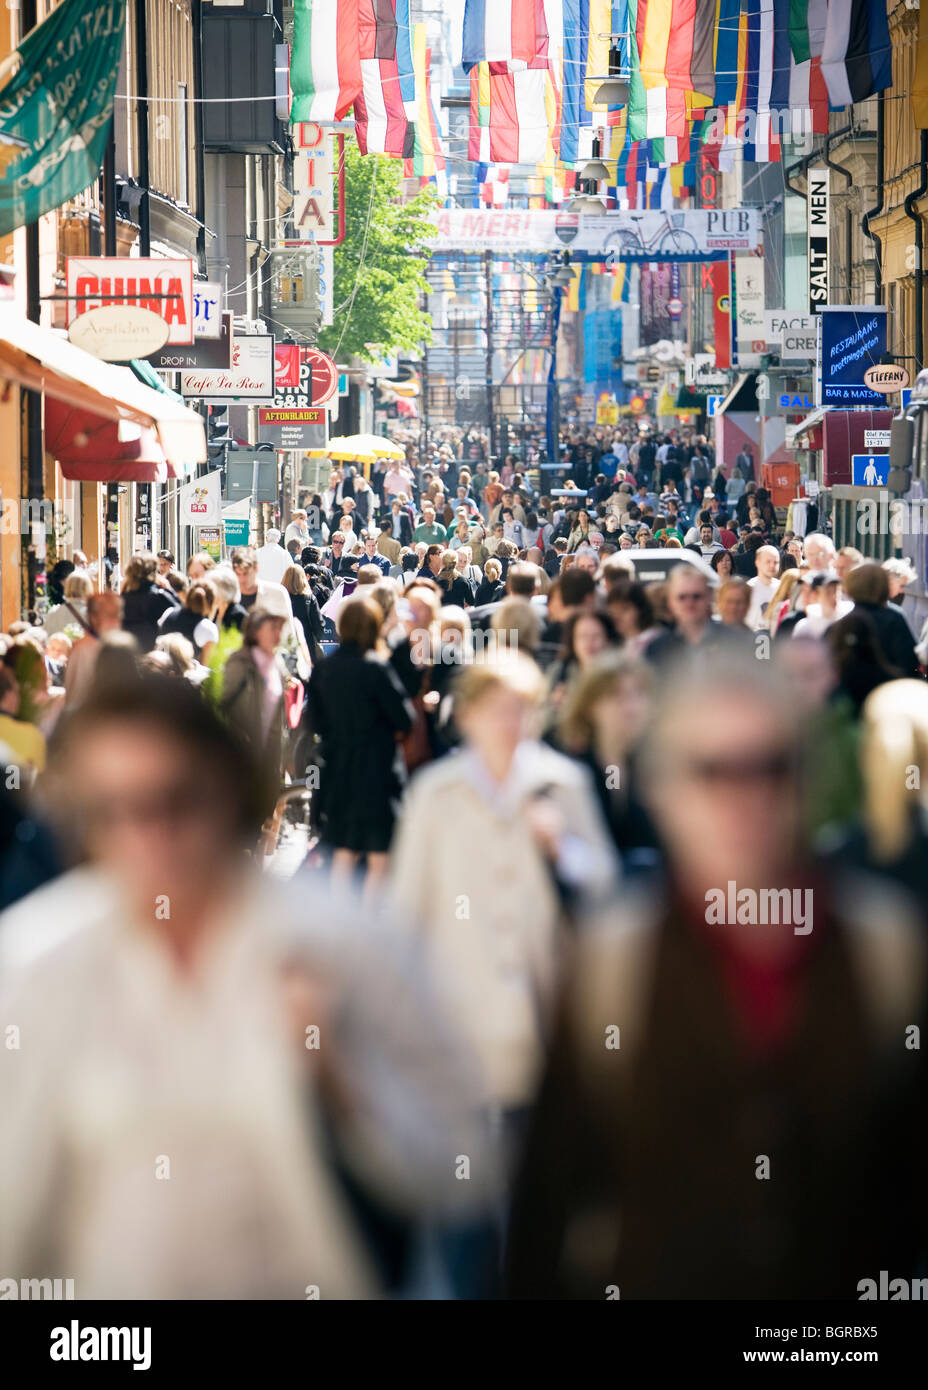 A crowd of people in the street, Stockholm, Sweden. Stock Photo